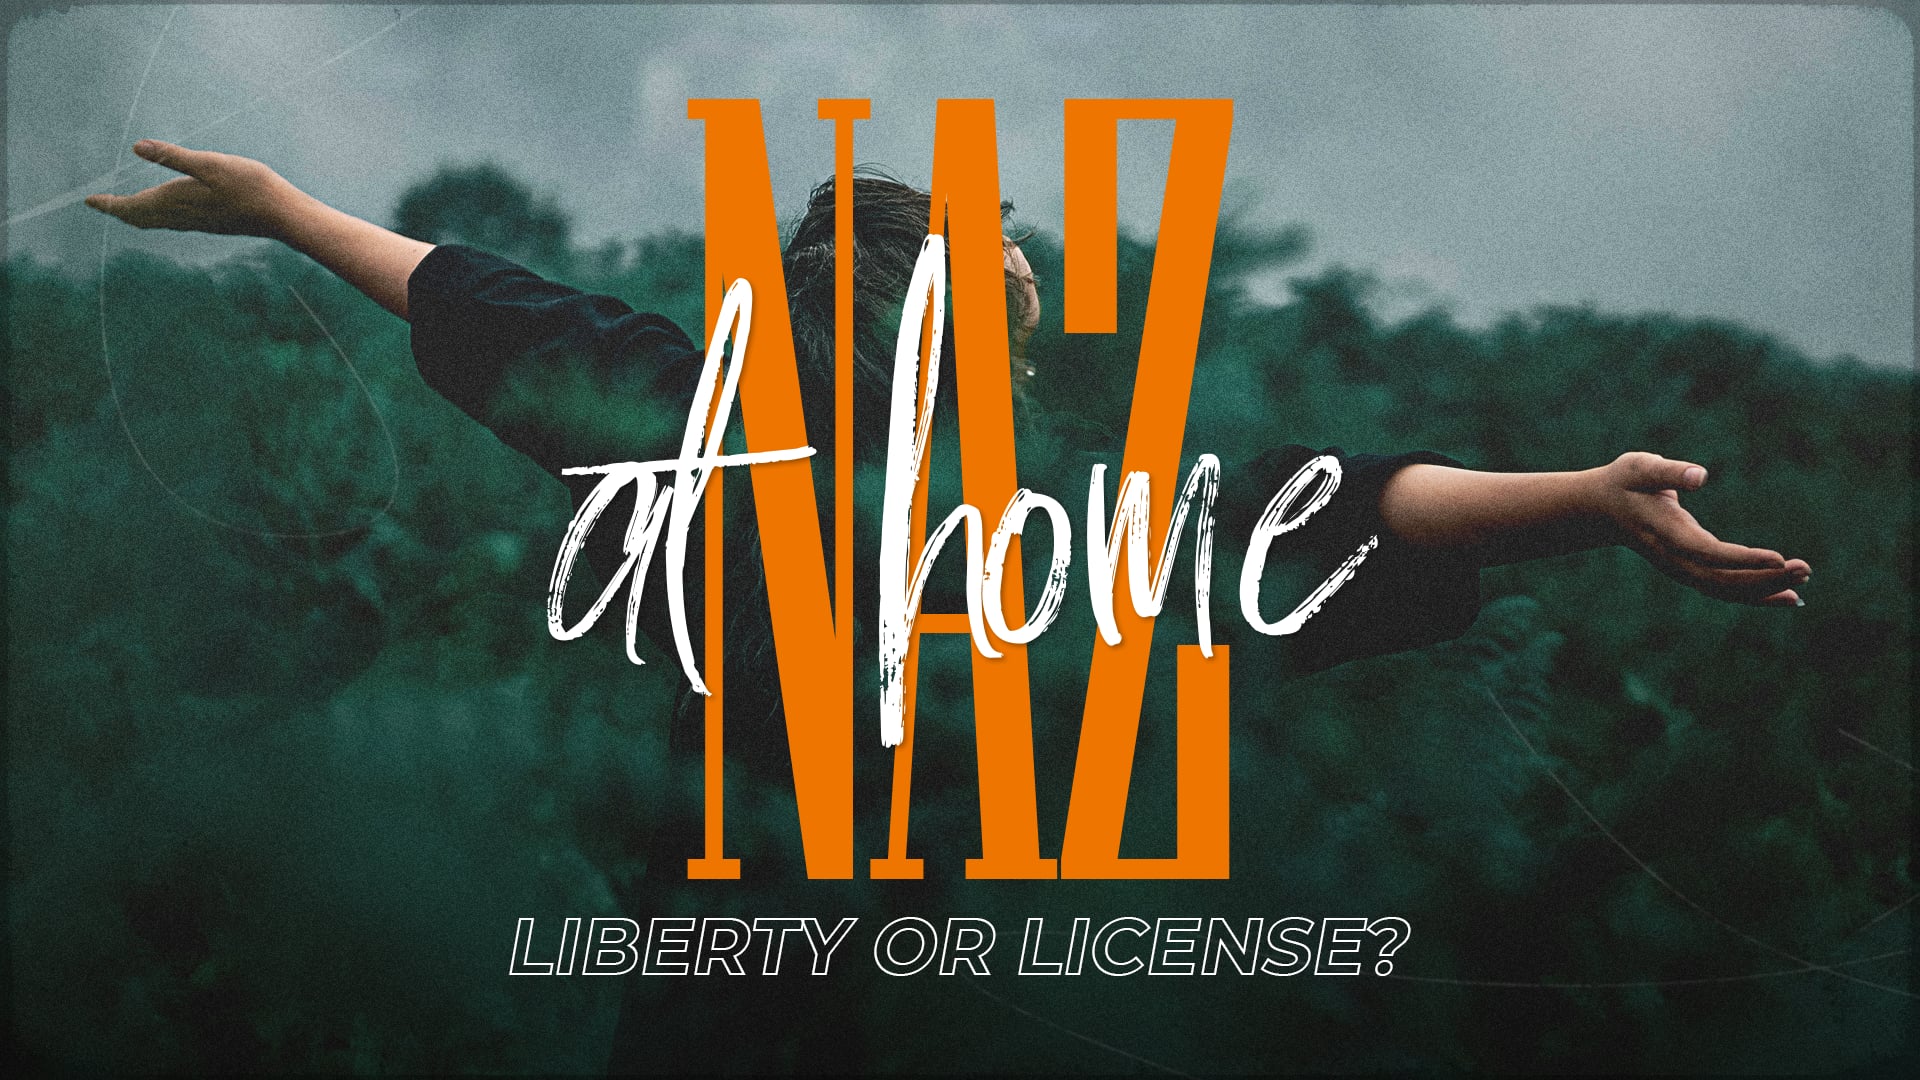 Liberty or License?